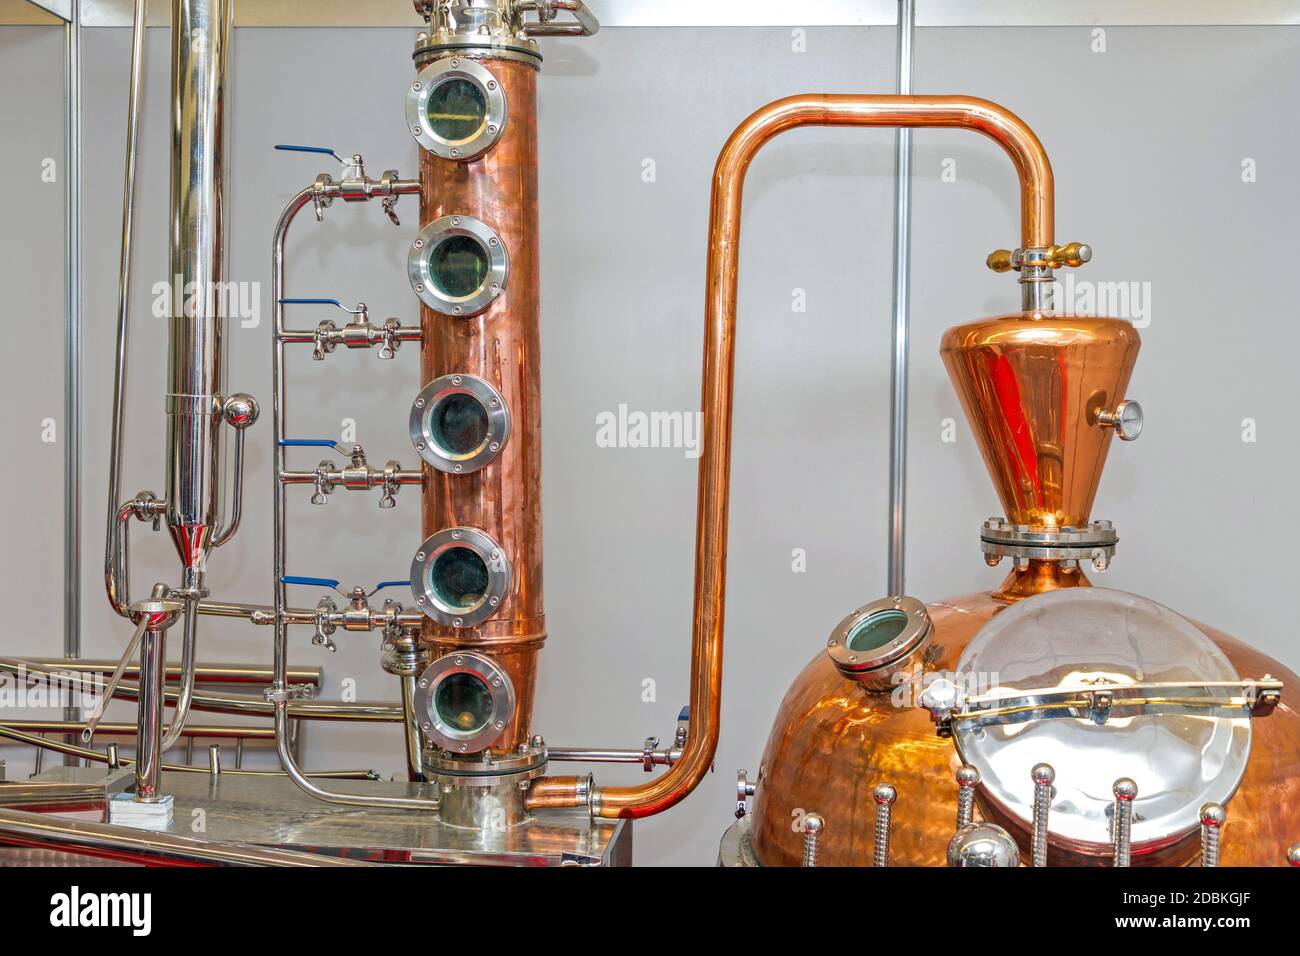 Copper Still Pipes Distillery Equipment Micro Brewery Stock Photo - Alamy